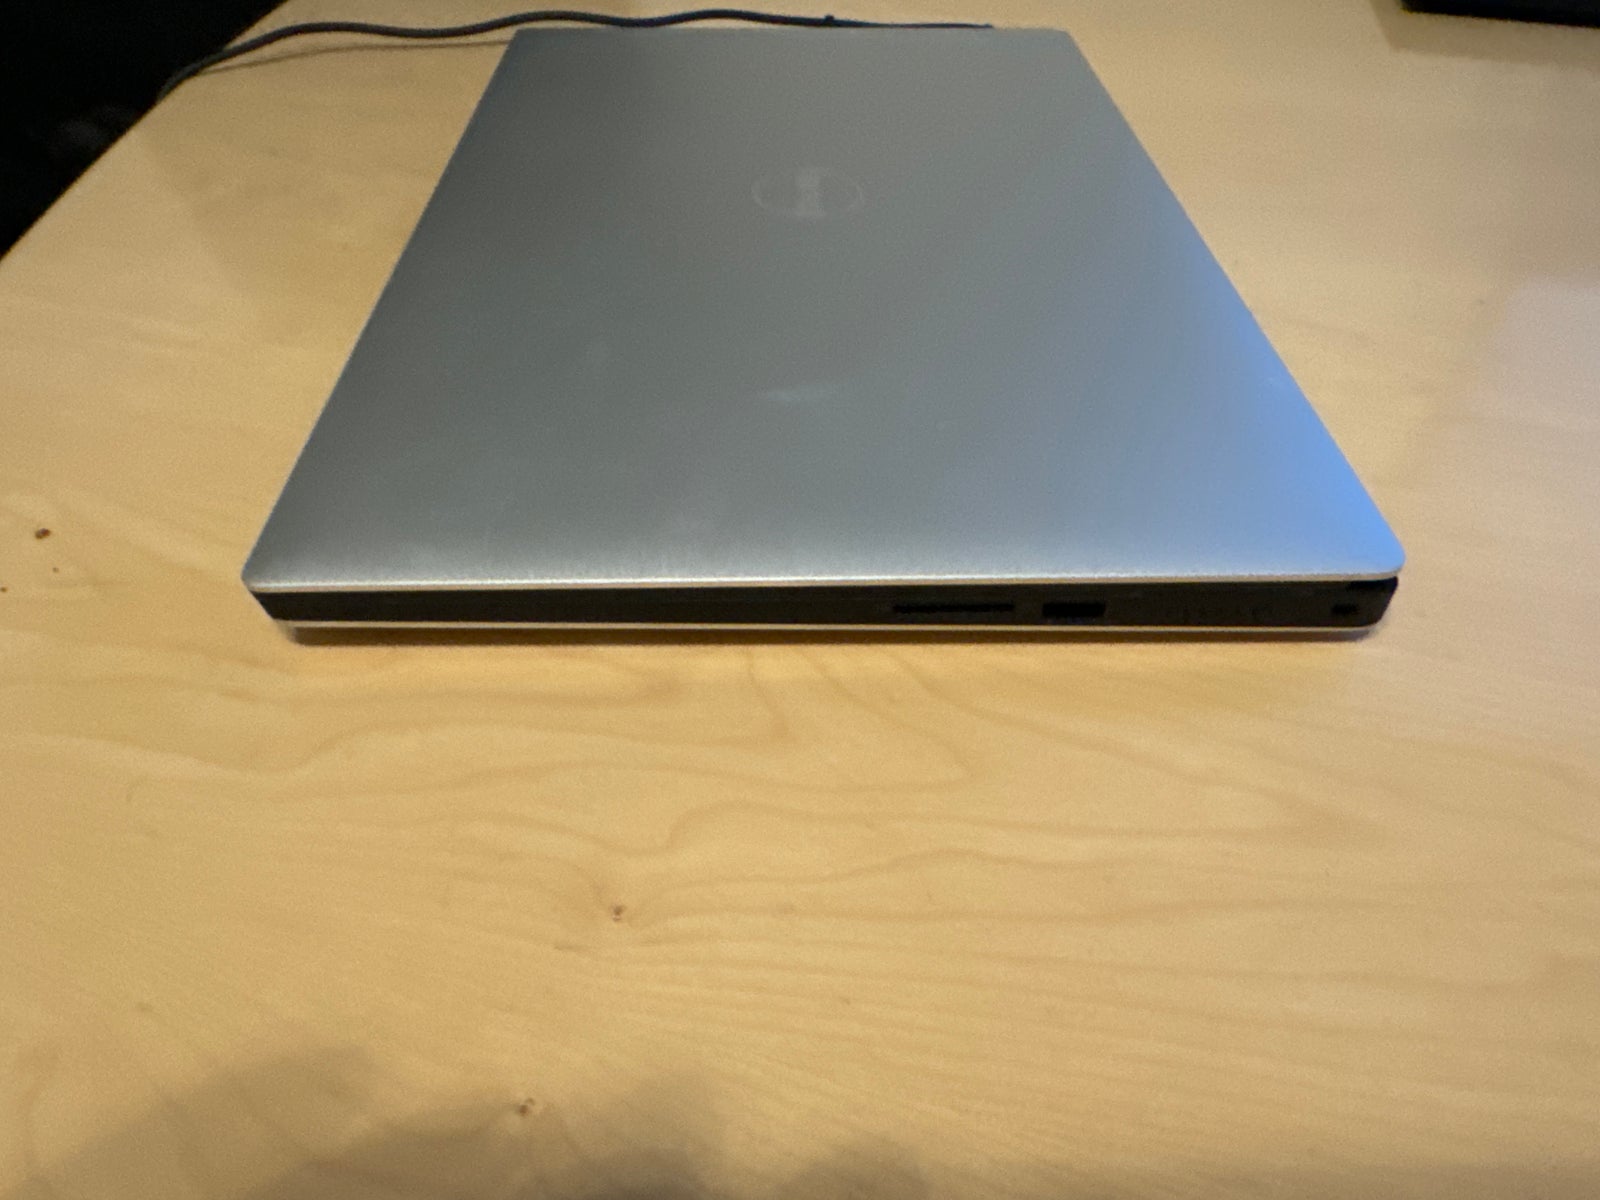 Dell XPS 15 9570, 2.90/4.60 GHz, 32 GB ram